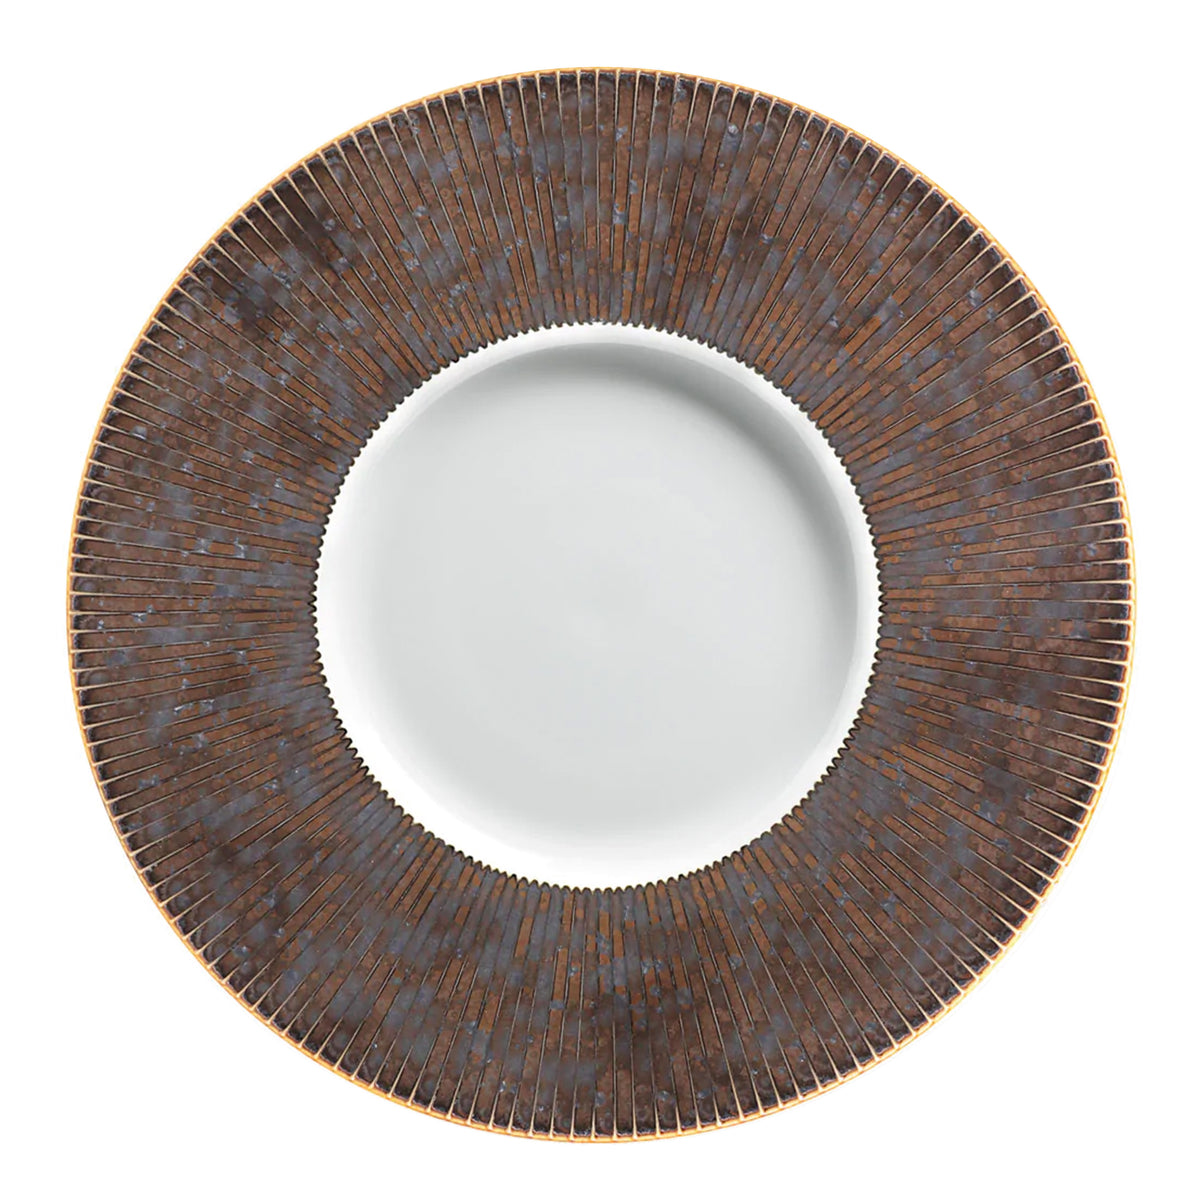 AGUIRRE - Charger plate, Bolero